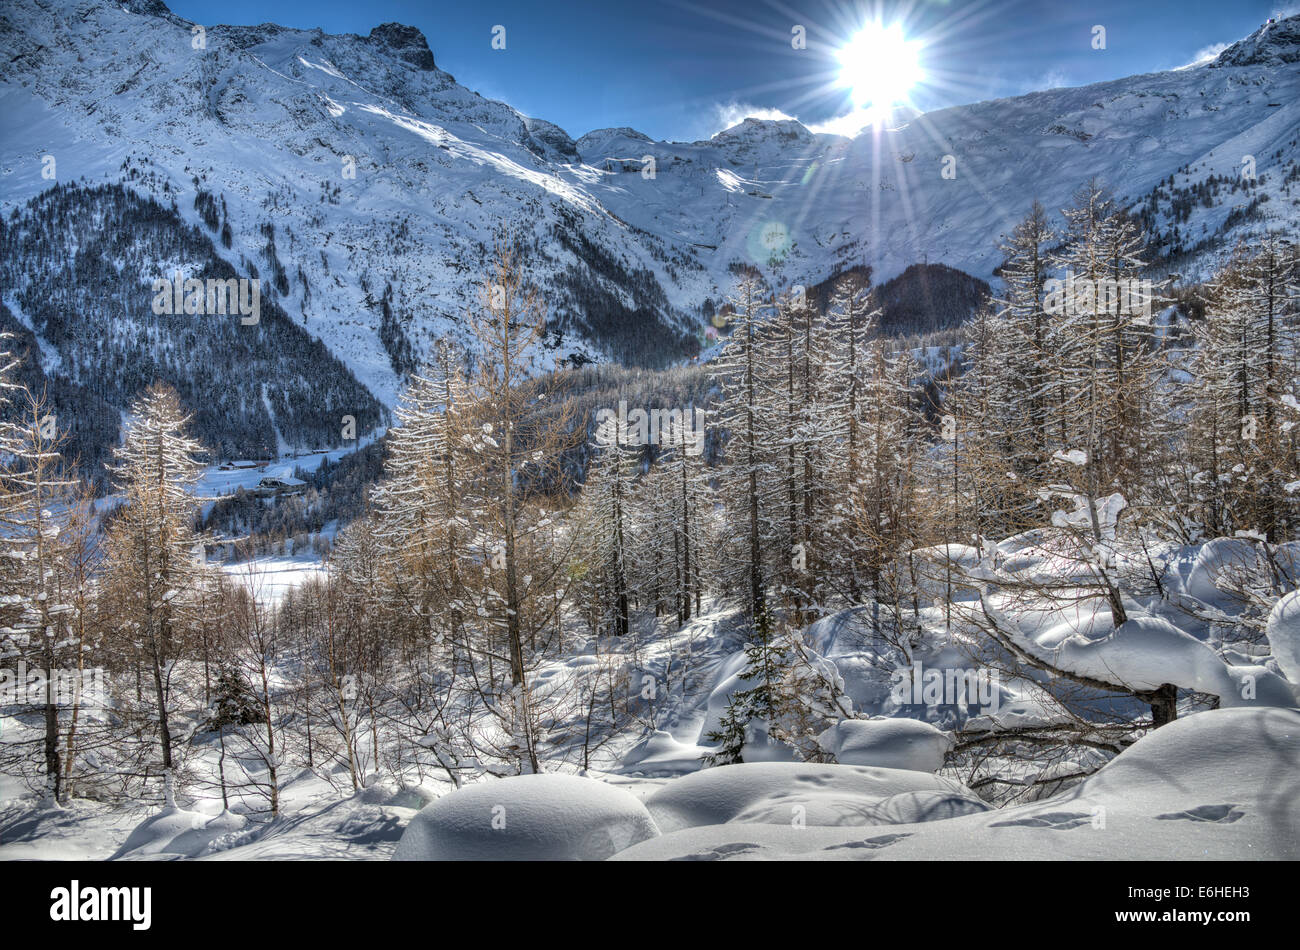 Mountain and larch forest under fresh snow. Swiss Alps, near the village of Saas-Fee. Stock Photo